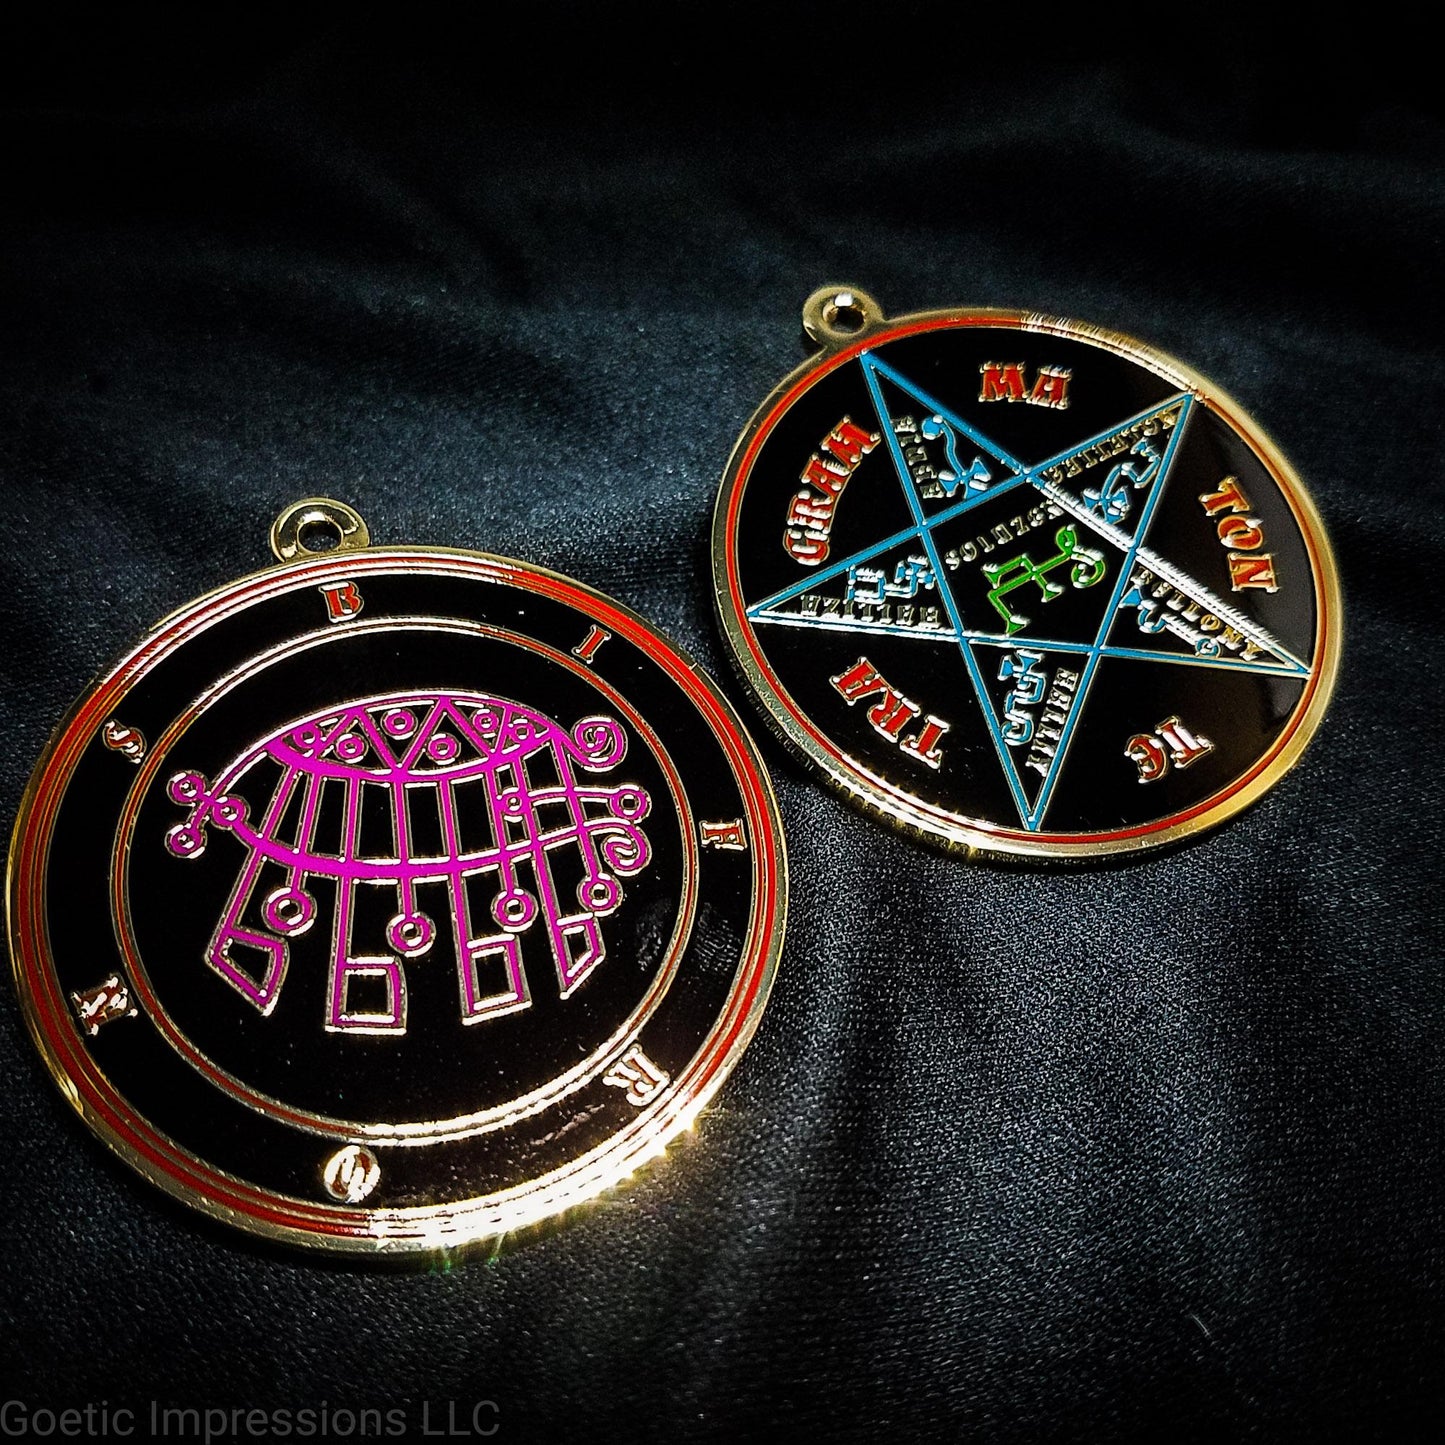 Bifrons sigil medallion with Pentacle of Solomon on reverse side